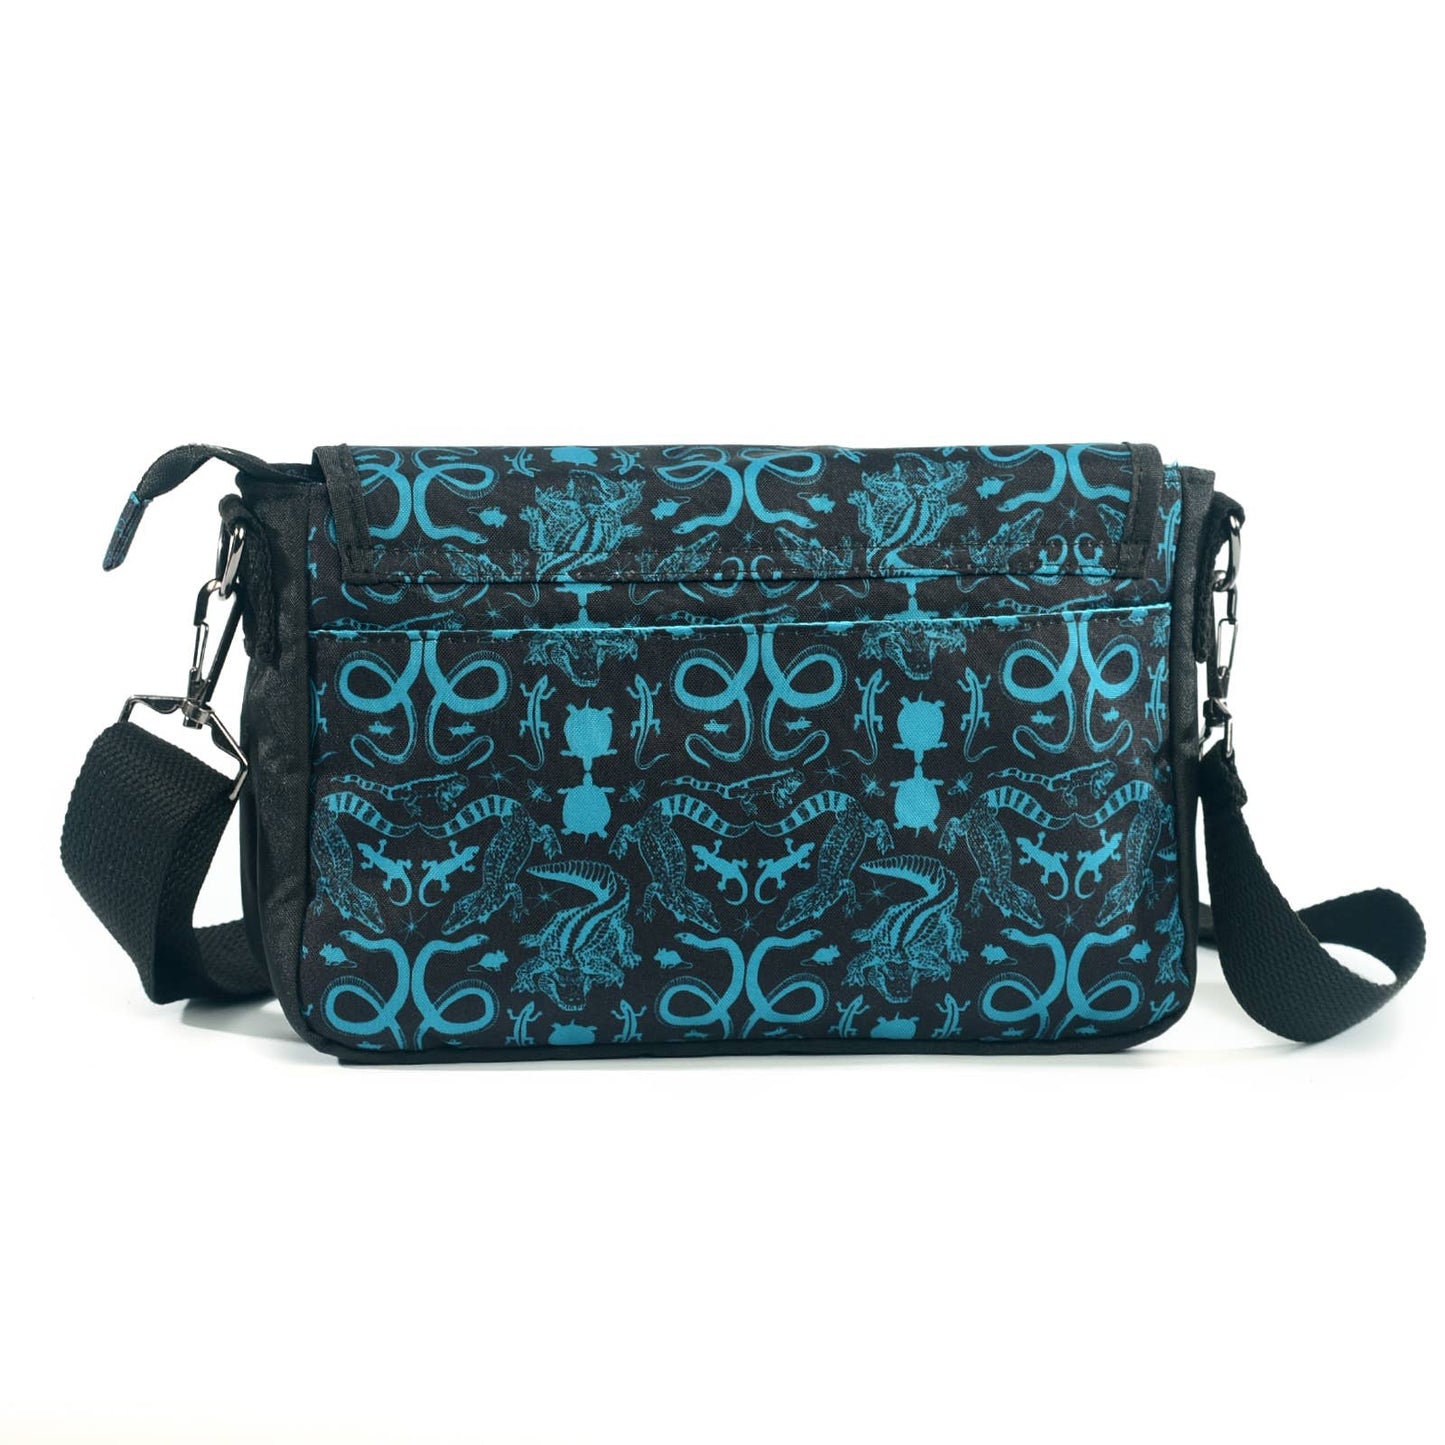 Stride Crossbody Bag - Cold Blooded (Reptiles)